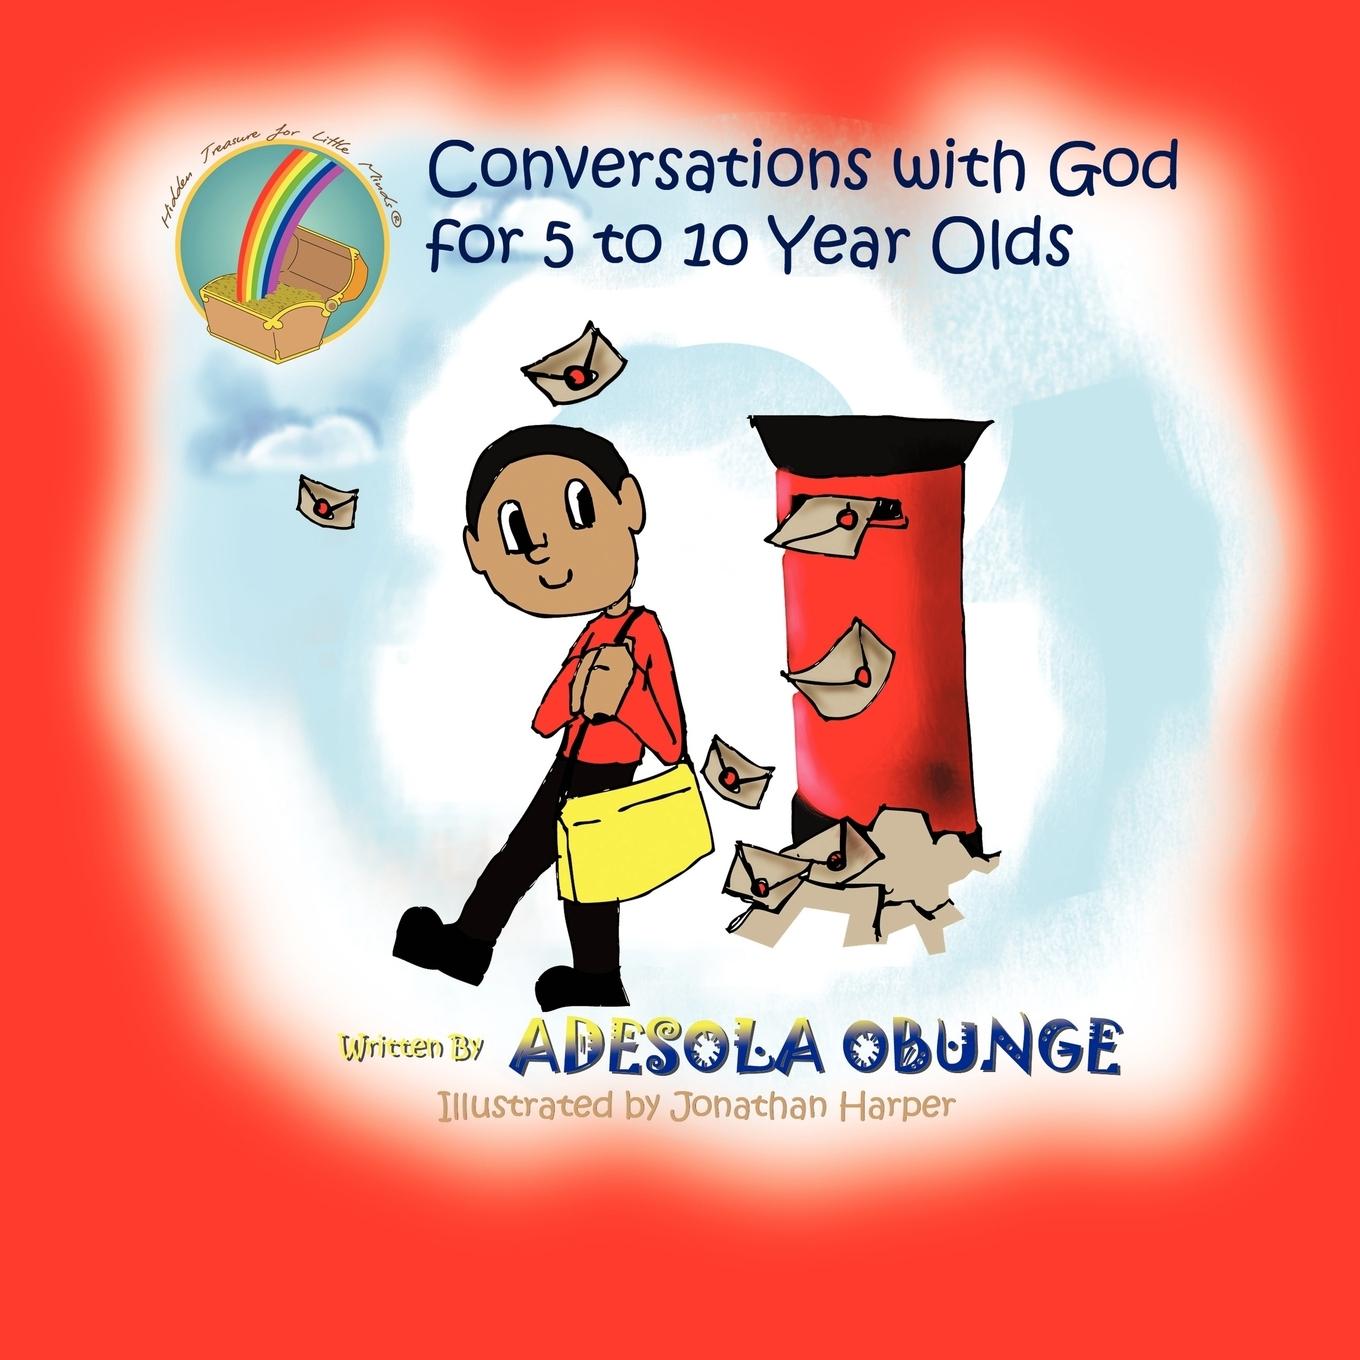 Conversations With God for 5 to 10 Year Olds - Obunge, Adesola